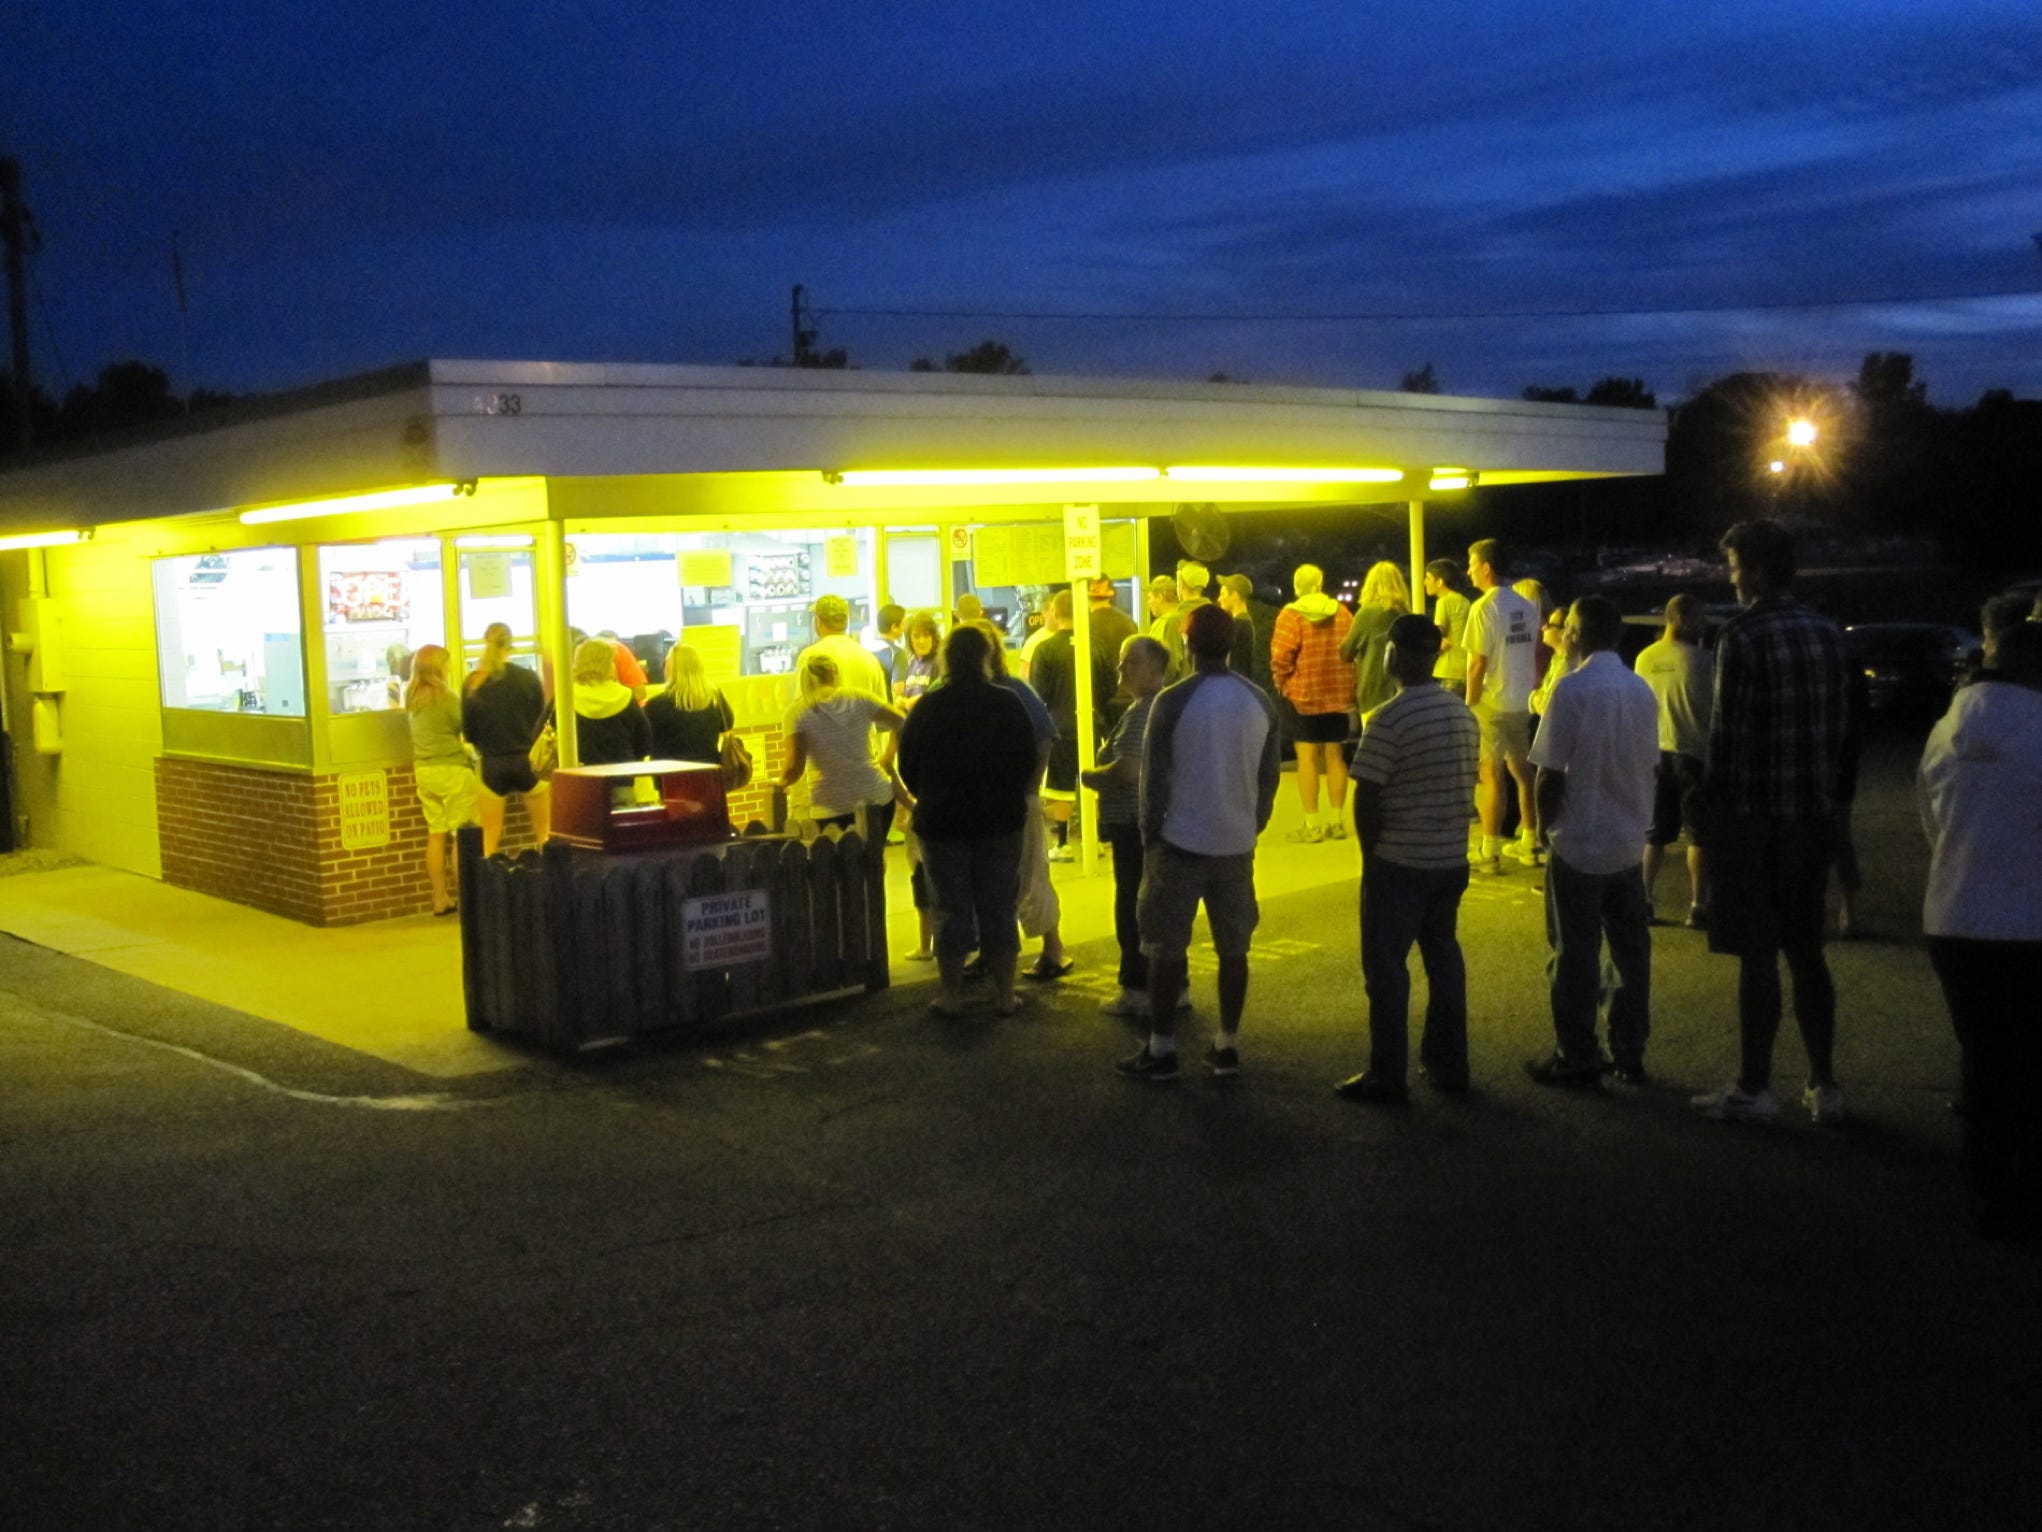 A pic of the DD ice cream stand